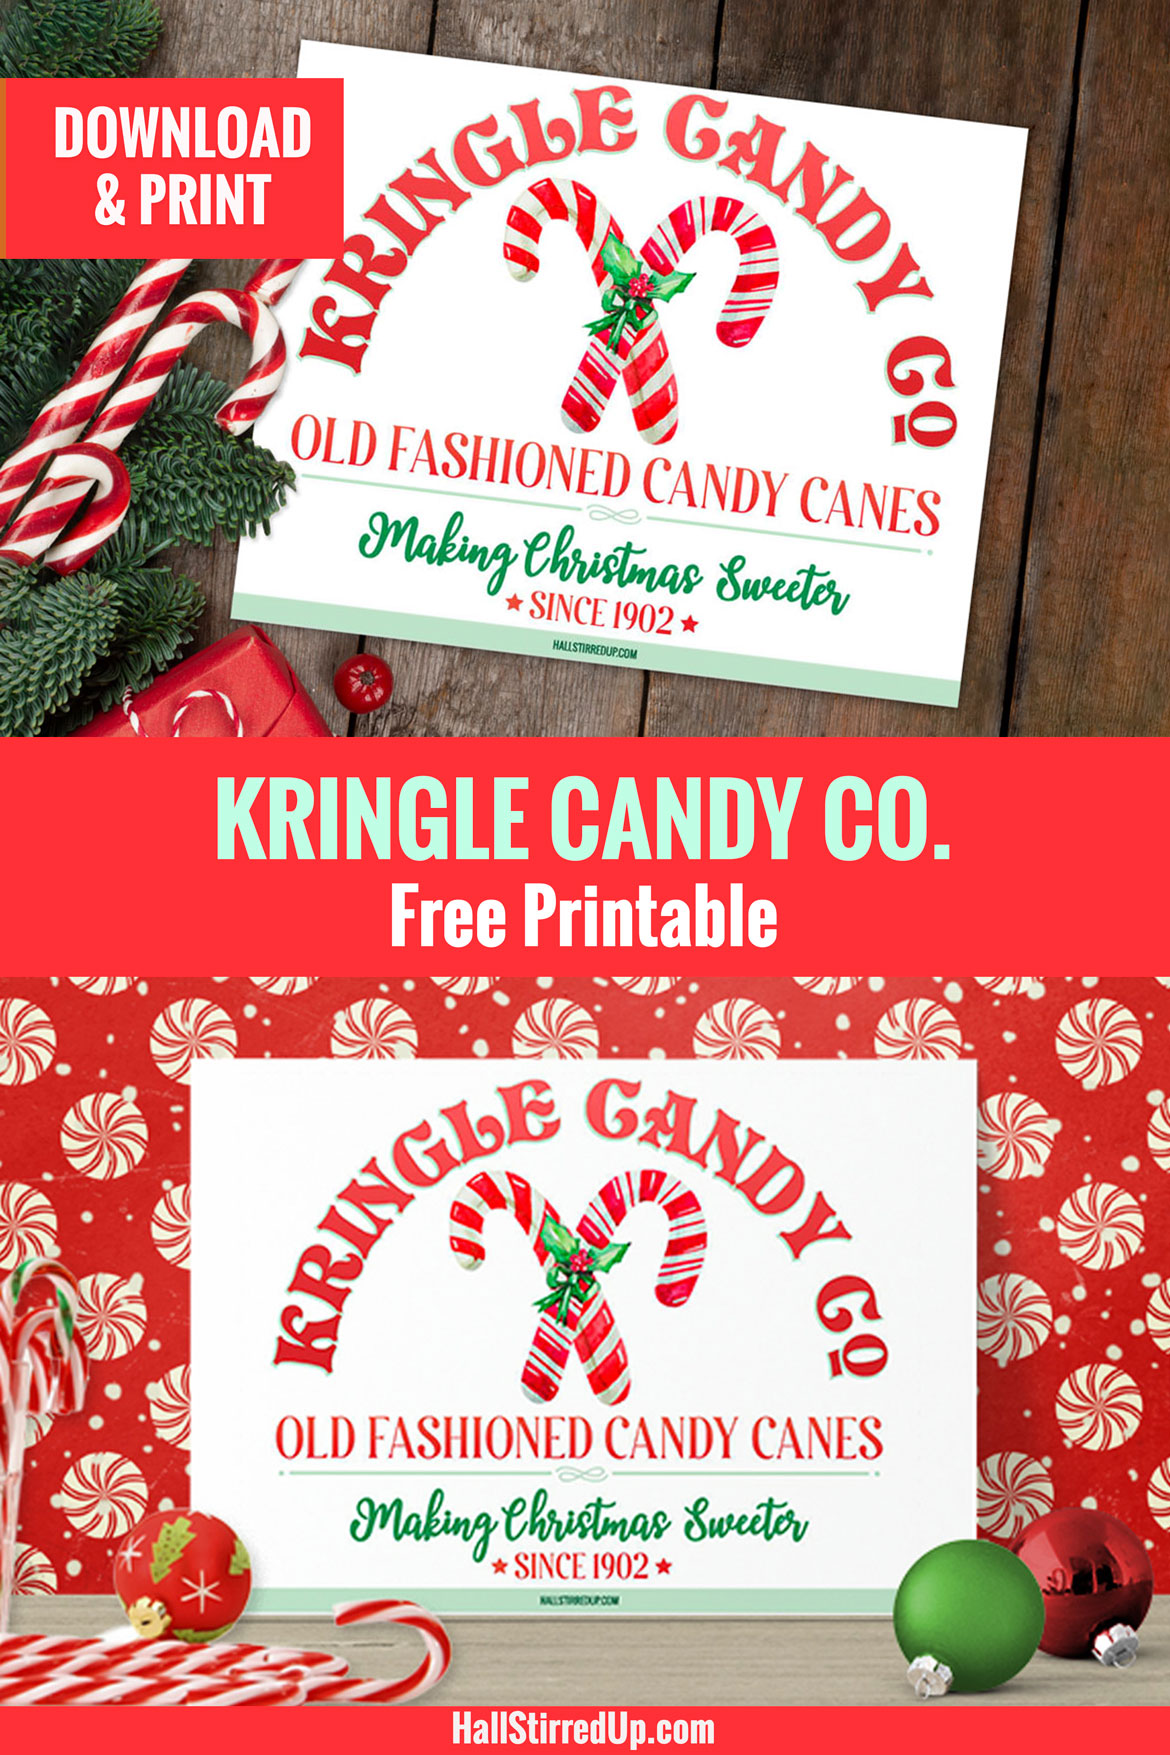 Share holiday fun with a free Kringle Candy Co. printable sign